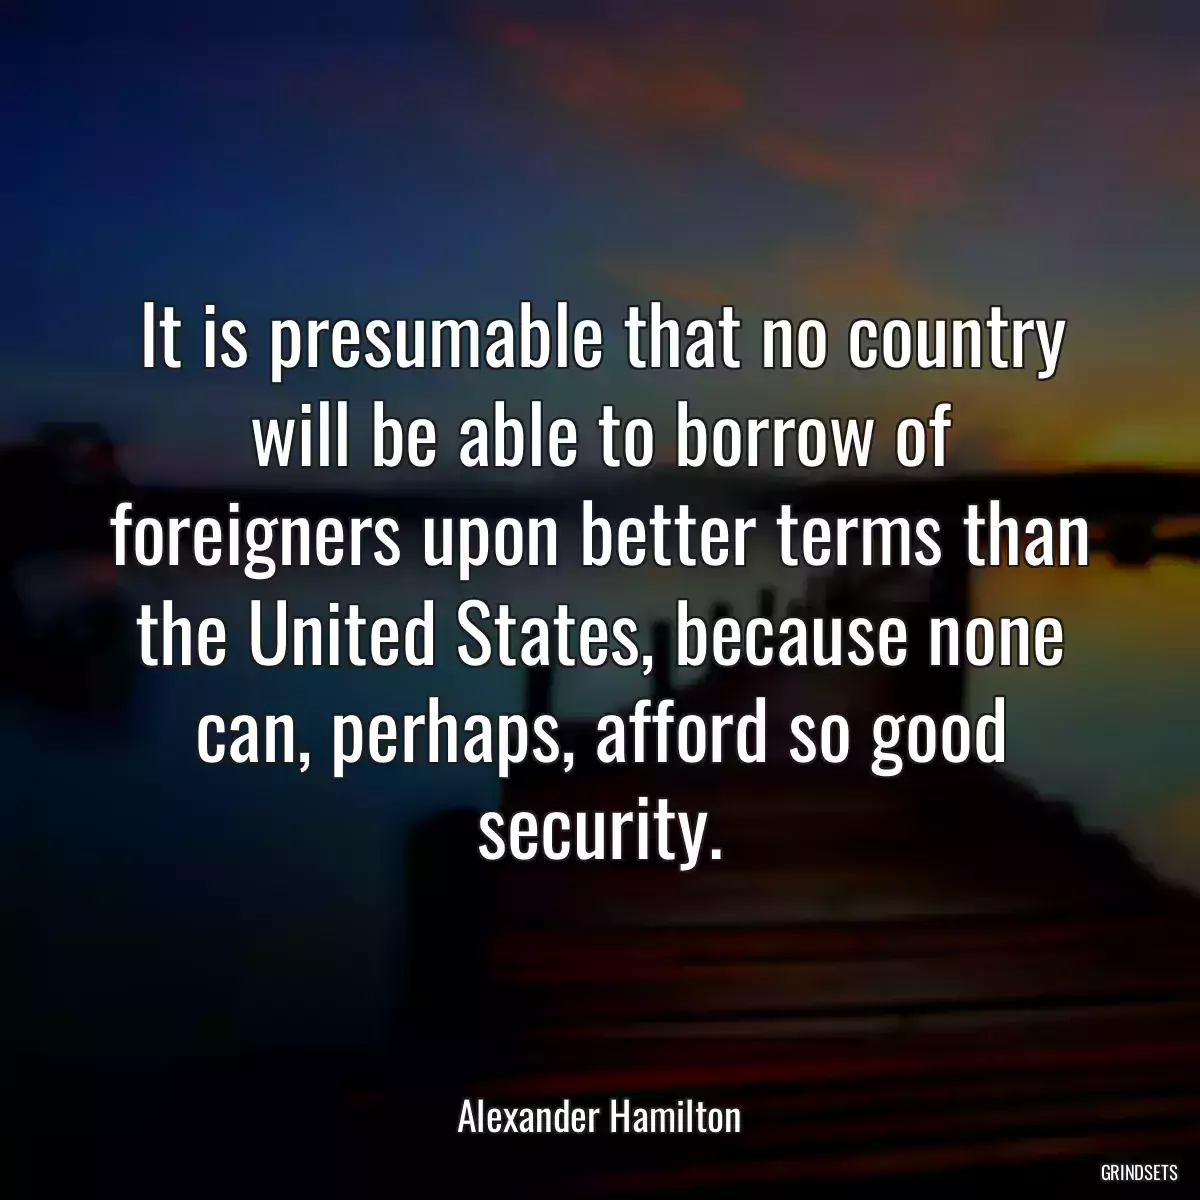 It is presumable that no country will be able to borrow of foreigners upon better terms than the United States, because none can, perhaps, afford so good security.